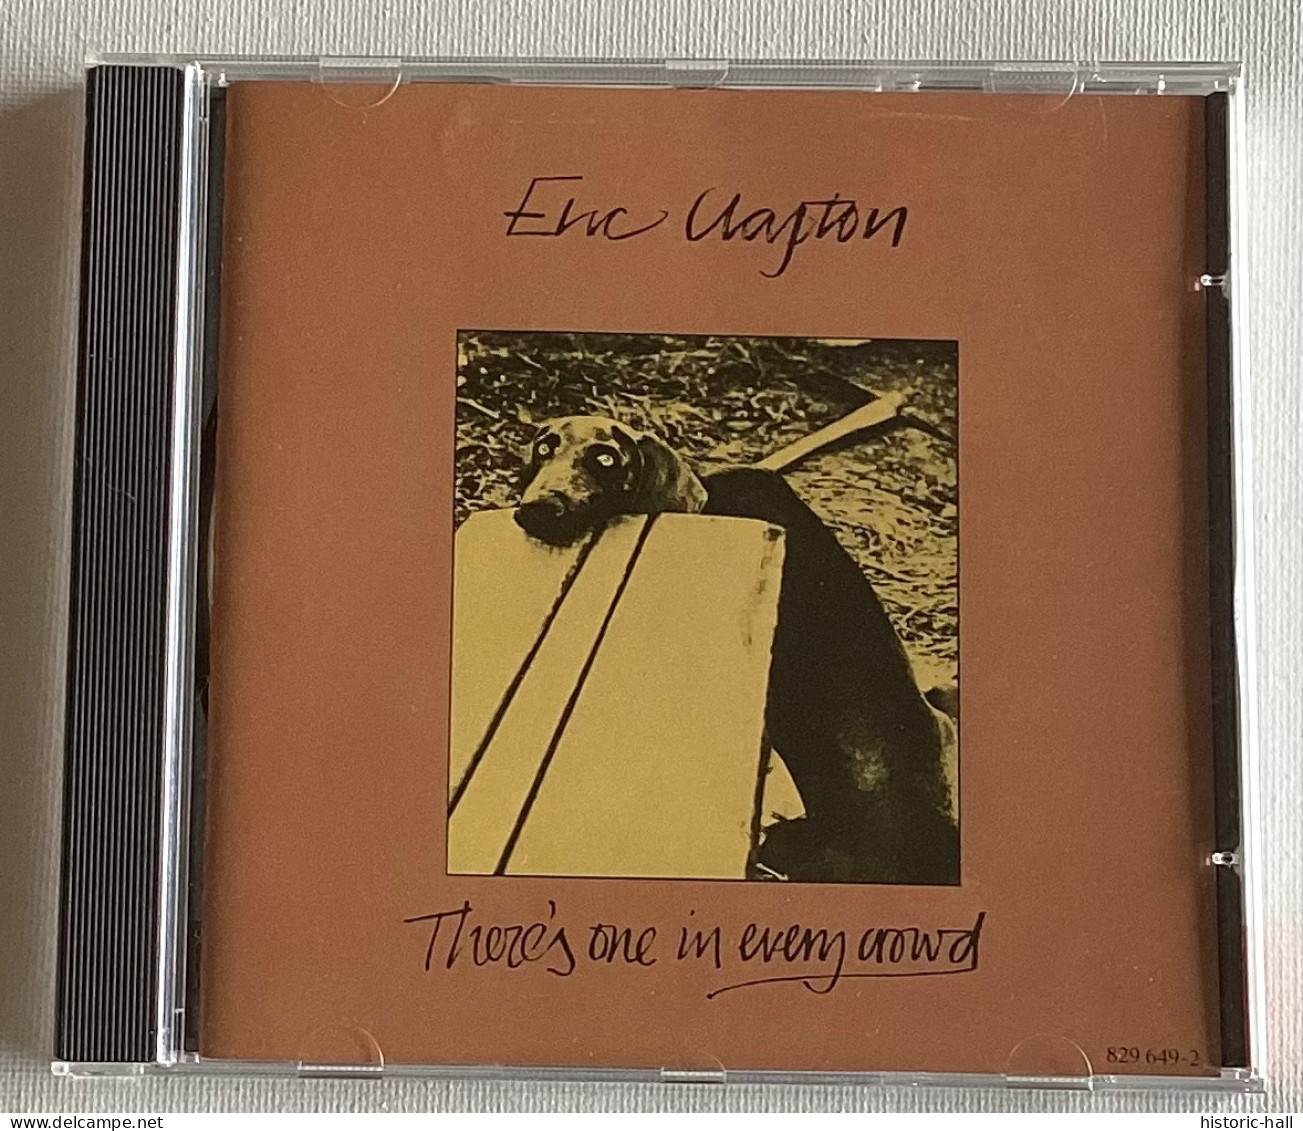 ÉRIC CLAPTON - There’s One In Everything Crowd - CD - 1975 - French Press - Blues